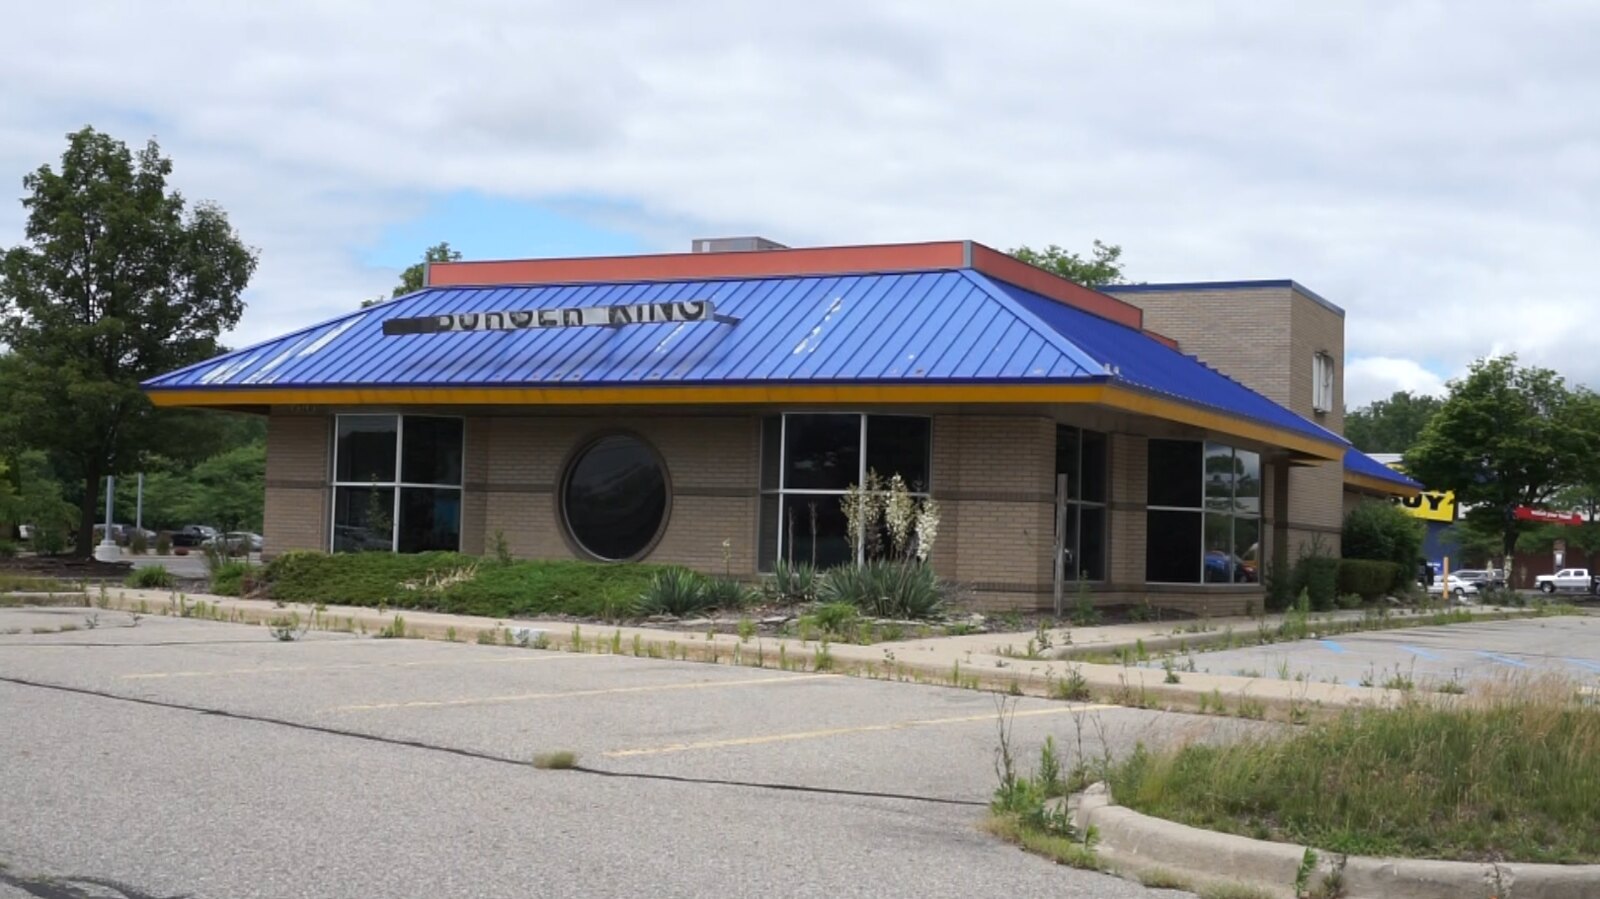 Development Updates to the Former Burger King Location on 2010 W Grand River